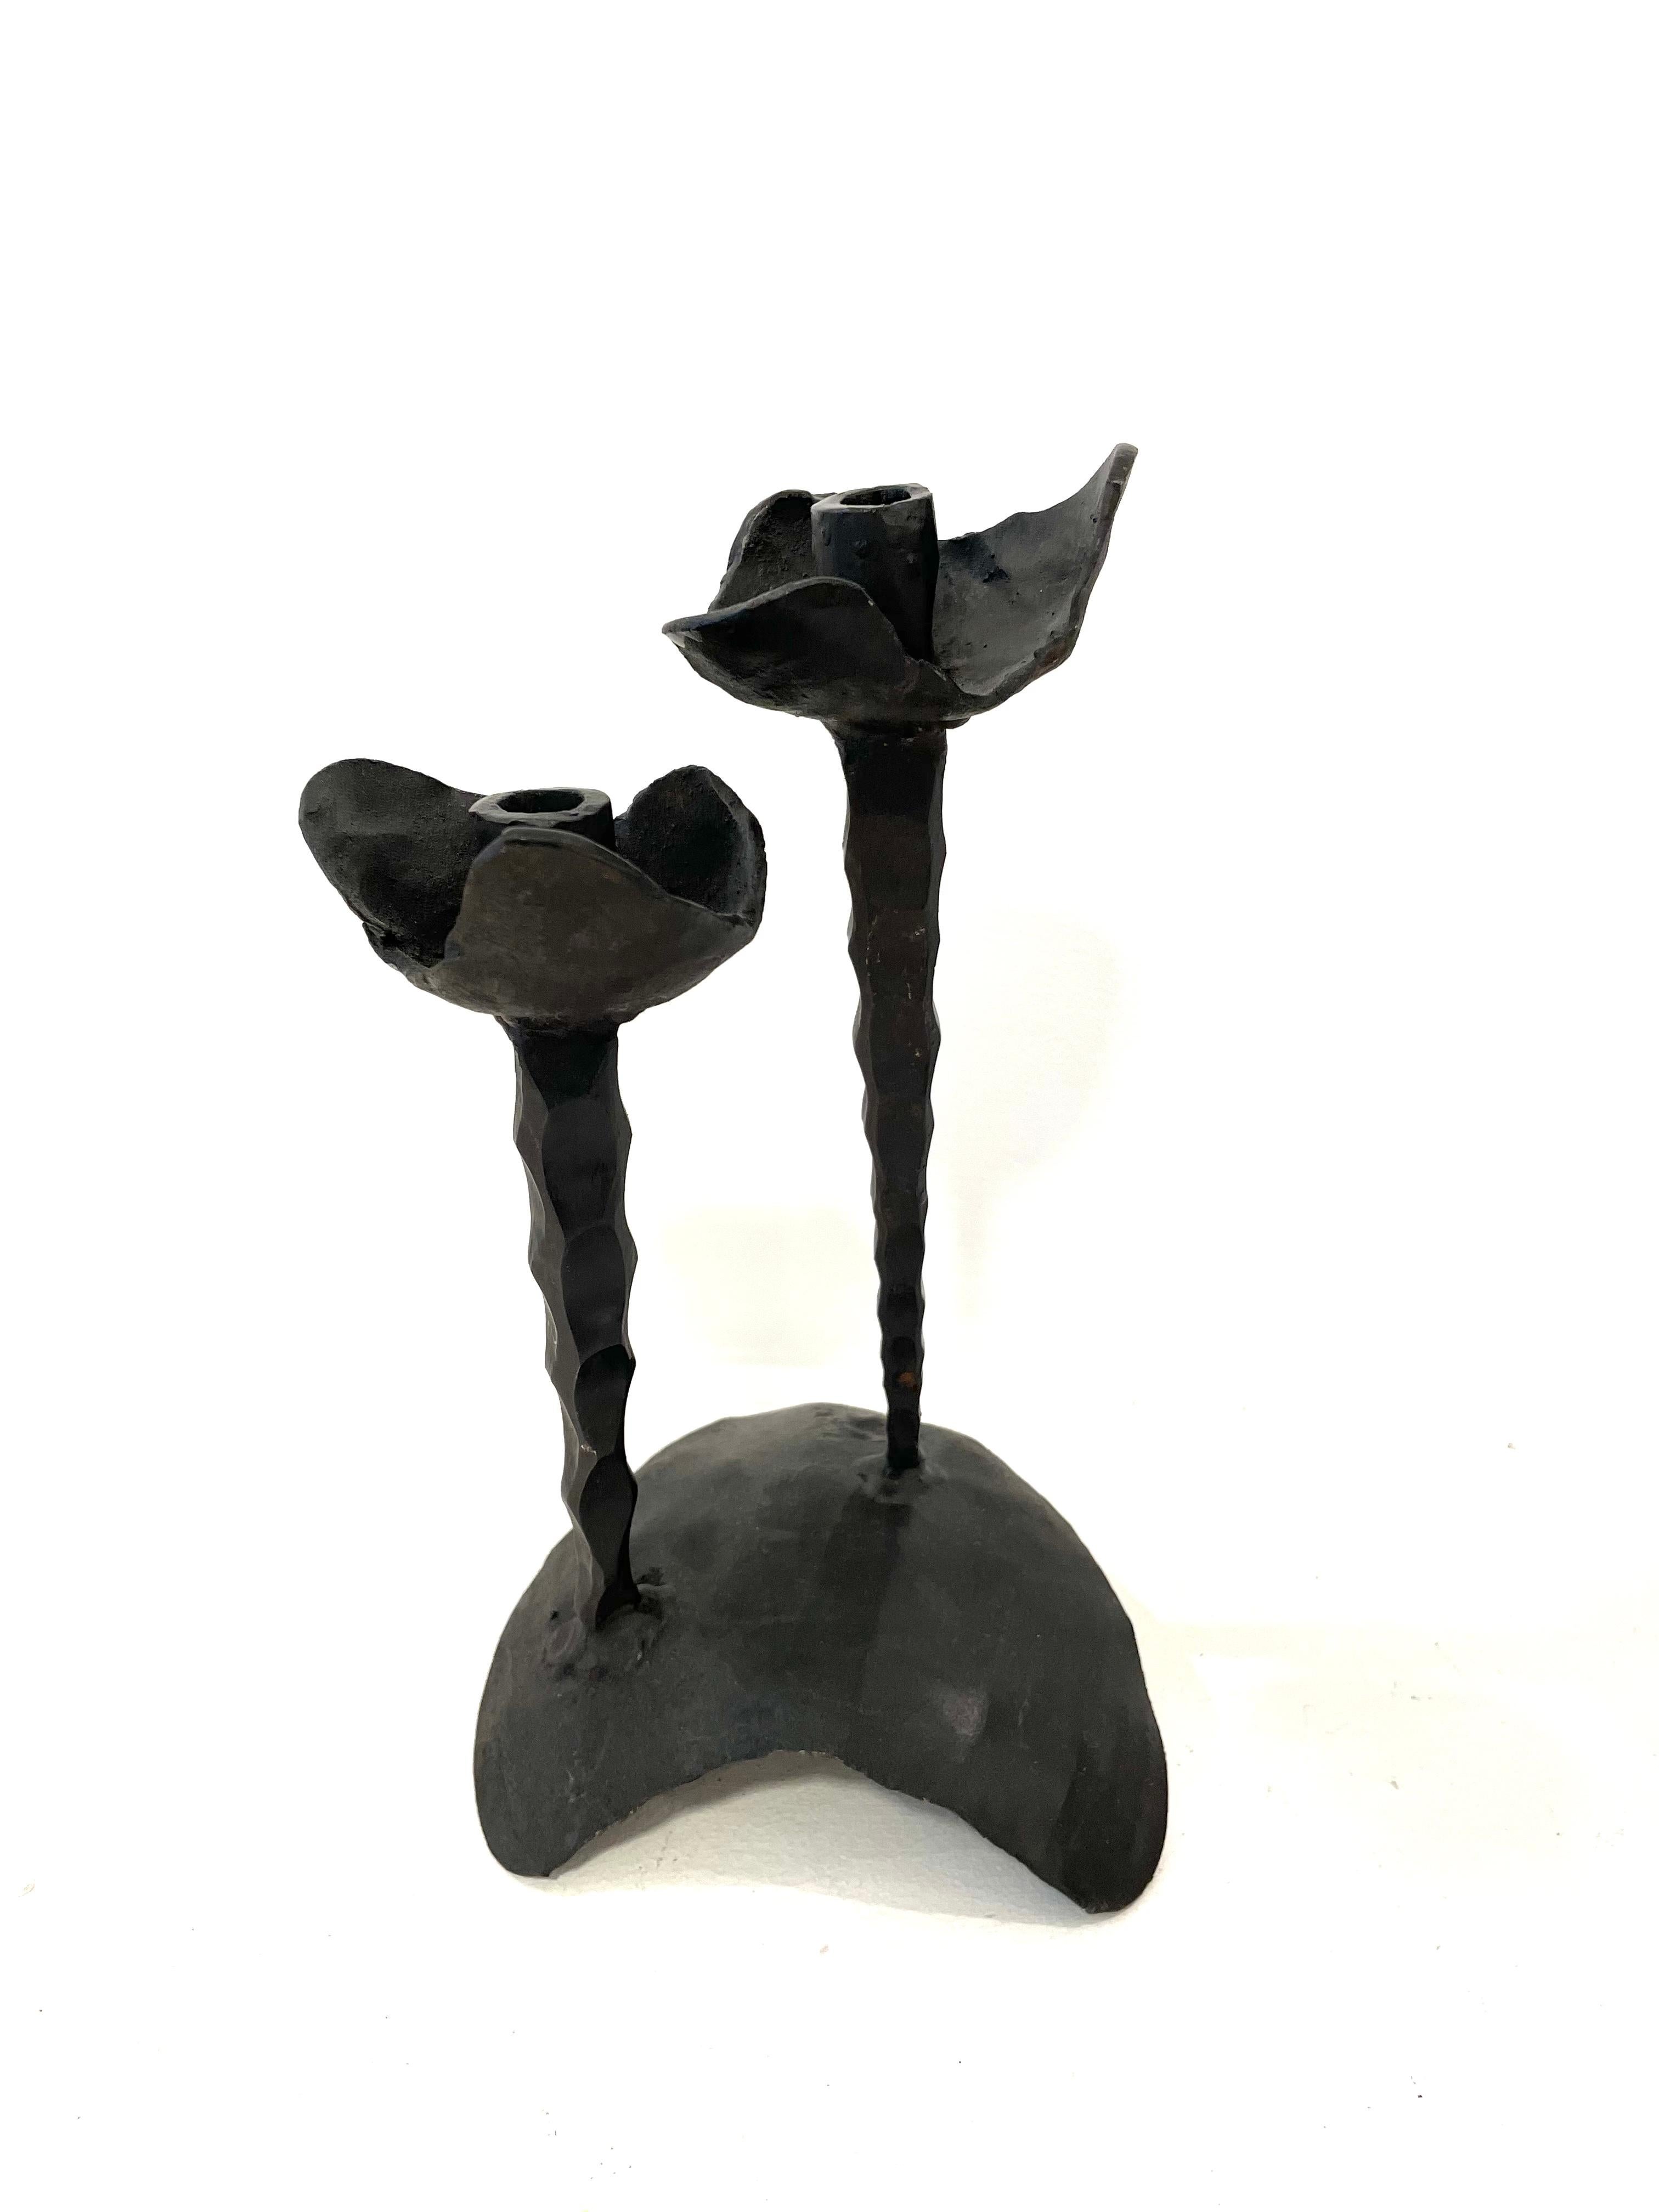 Iron Shabbat candle holder crafted in brutalist style by David Palombo. Made for two candles, each of the holders is decorated with petals-like shapes, providing an overall floral motive to this candle holder. 

David Palombo (1920-1966) was a